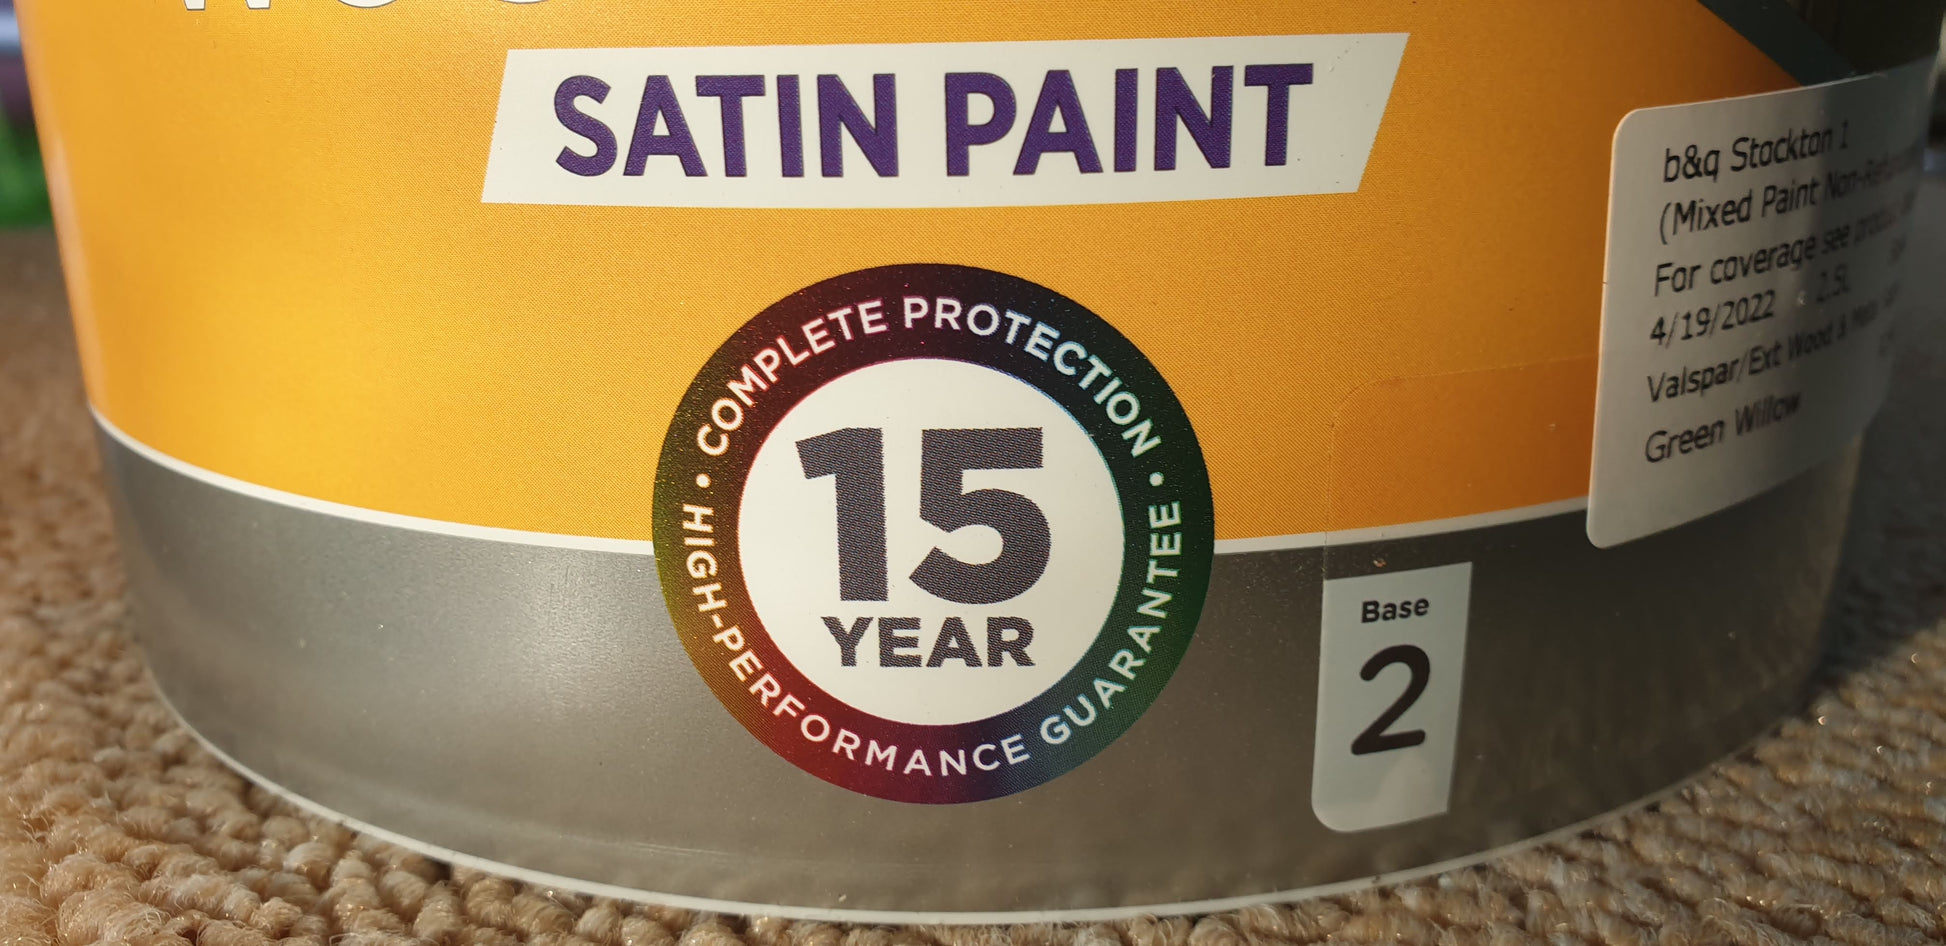 Painted inside and out using Valspar 15yr guaranteed Satin Exterior Metal & Wood Paint, with UV, mould, weather and crack resistance.